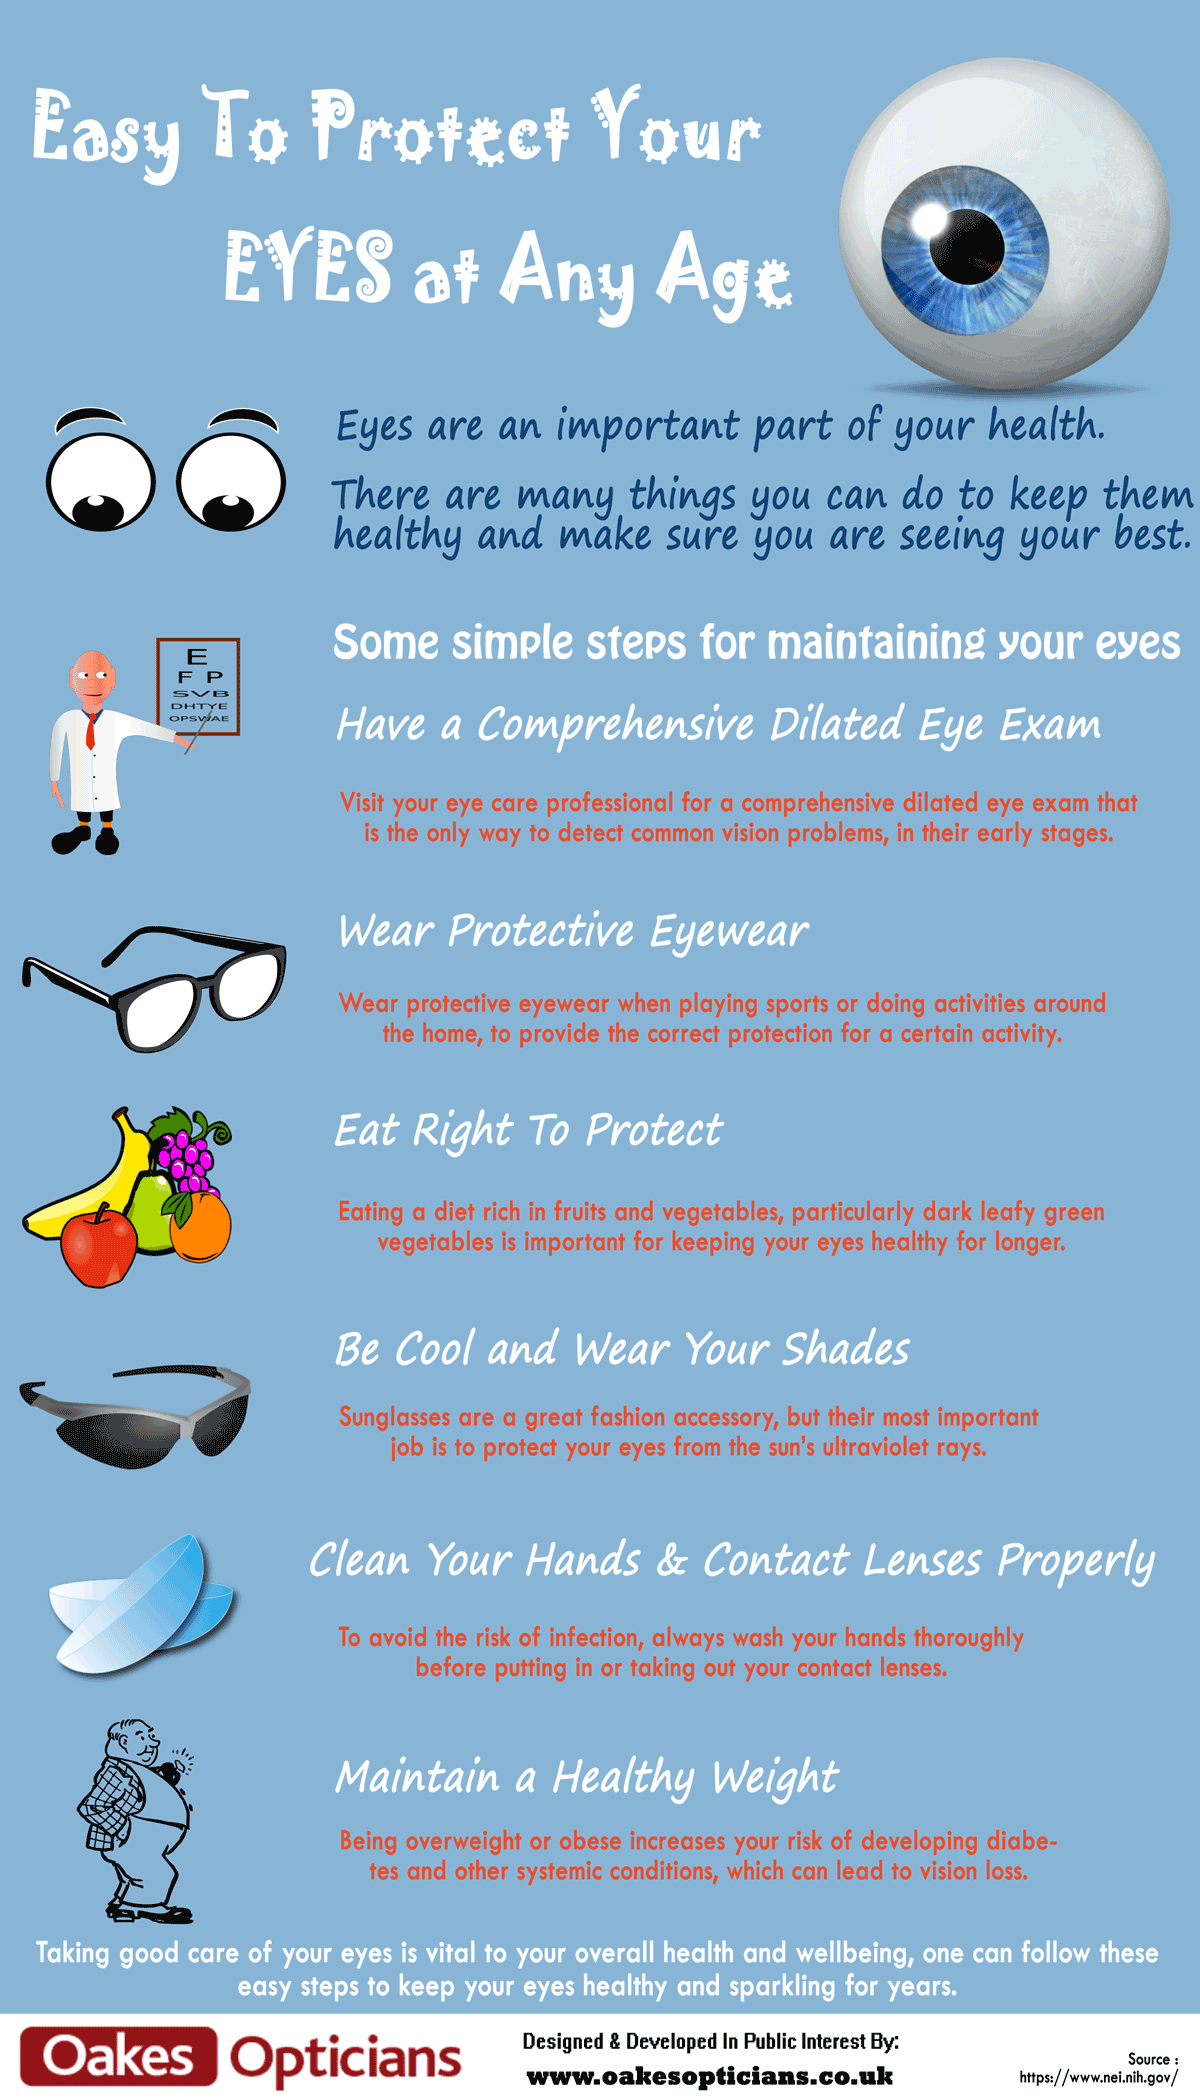 Easy To Protect Your Eyes at Any Age | Visual.ly